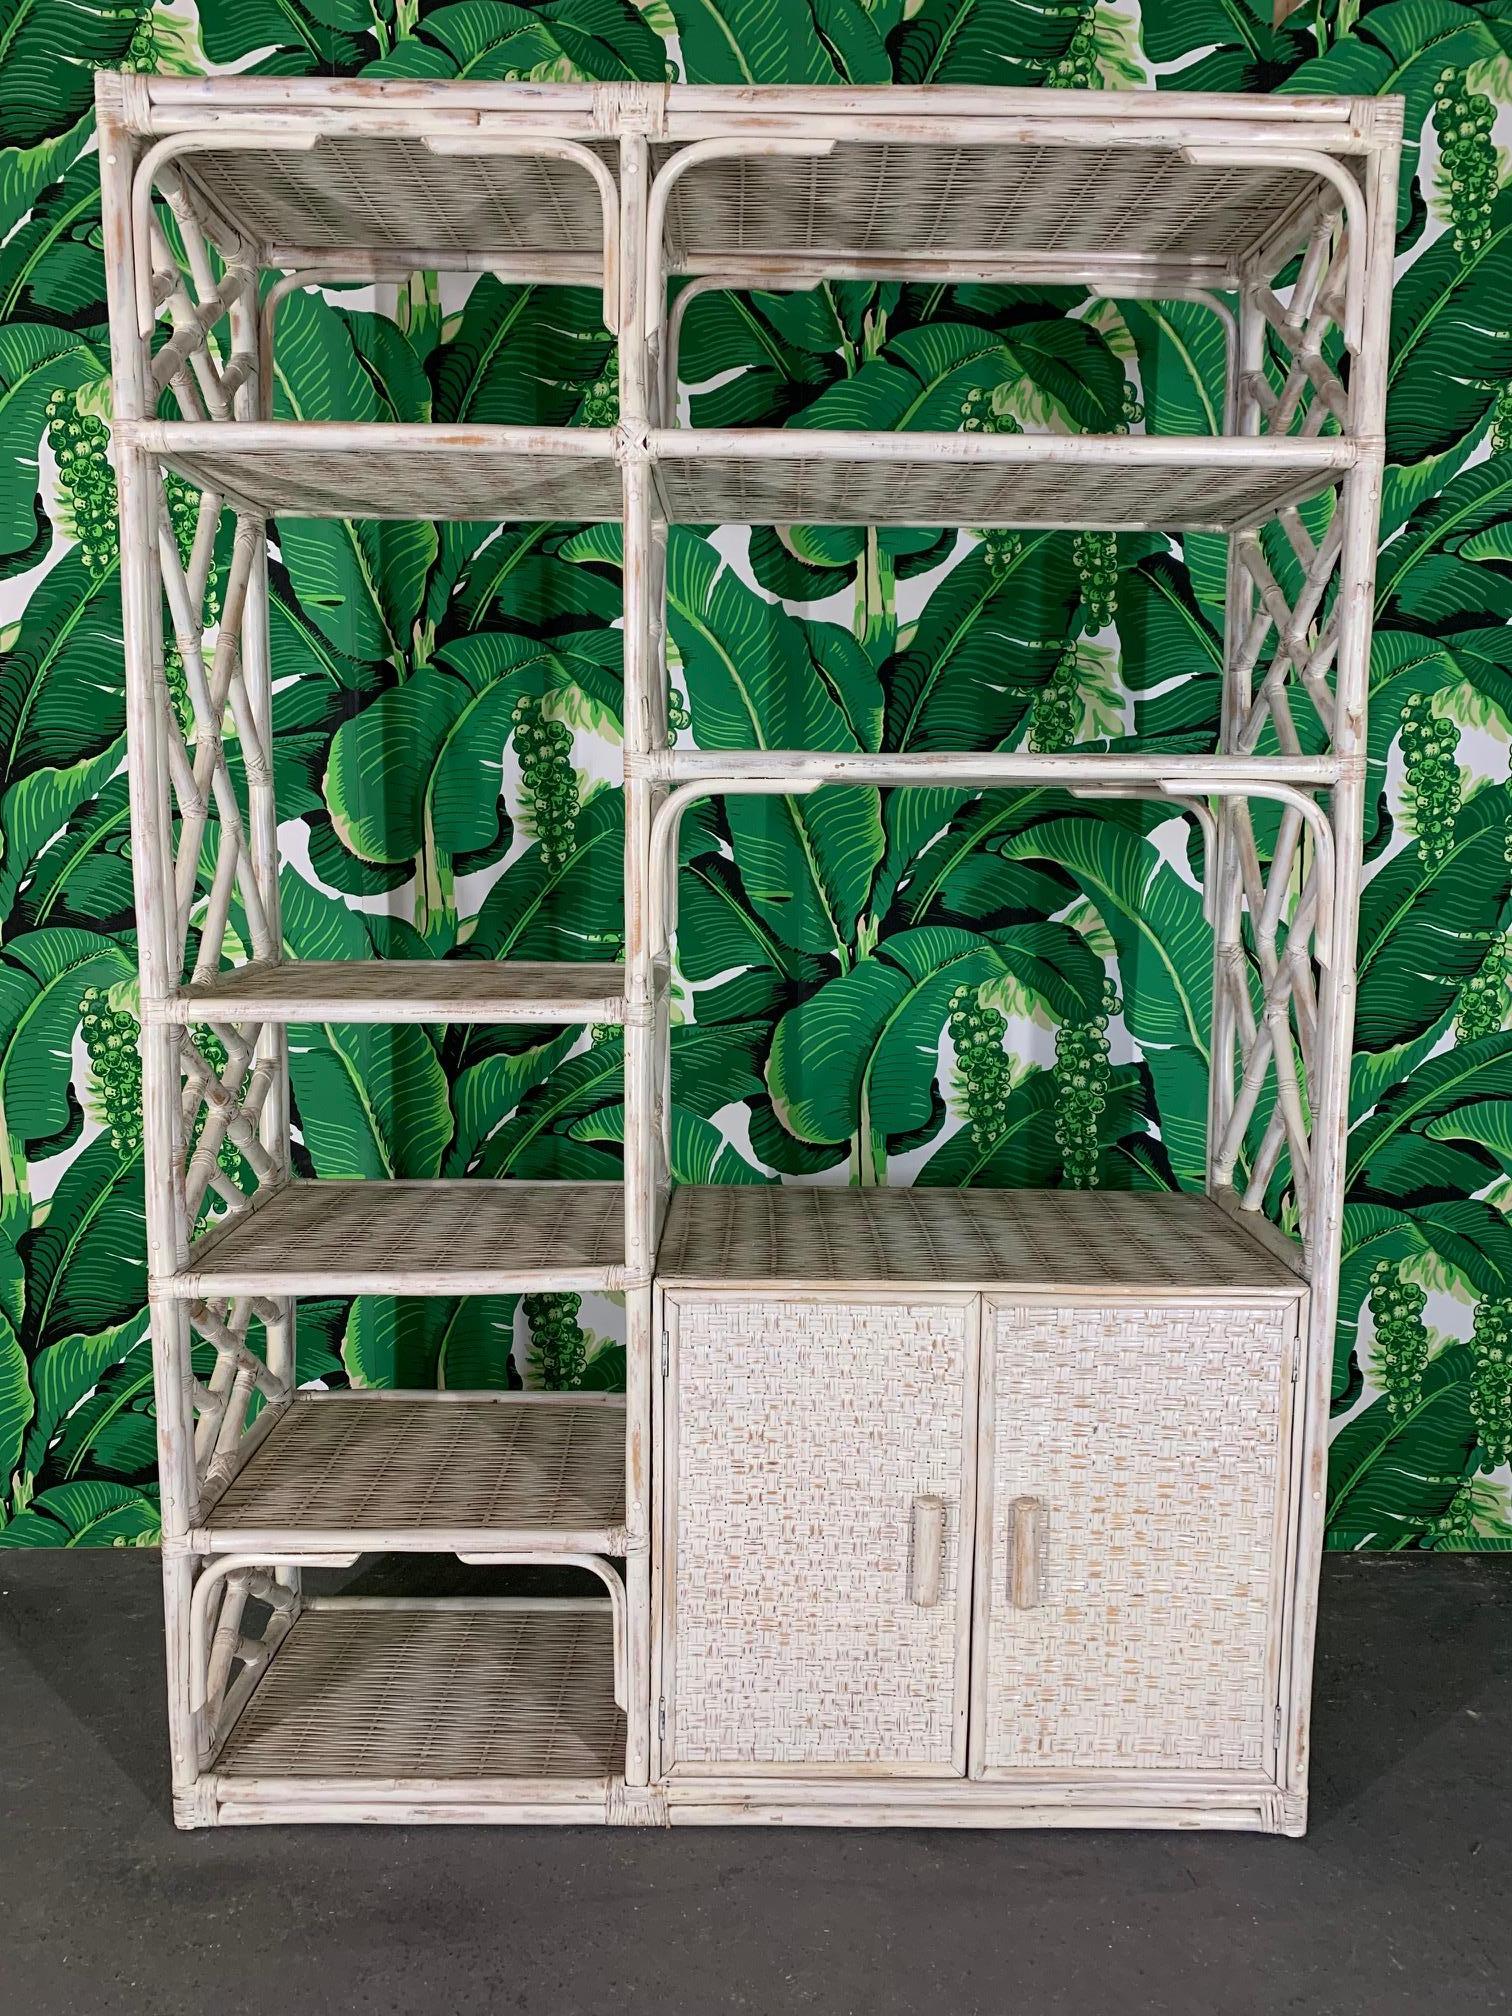 Vintage rattan étagère features chinoiserie detailing and a white washed finish. Ample shelving and extra storage behind double doors. Good vintage condition with minor imperfections consistent with age.